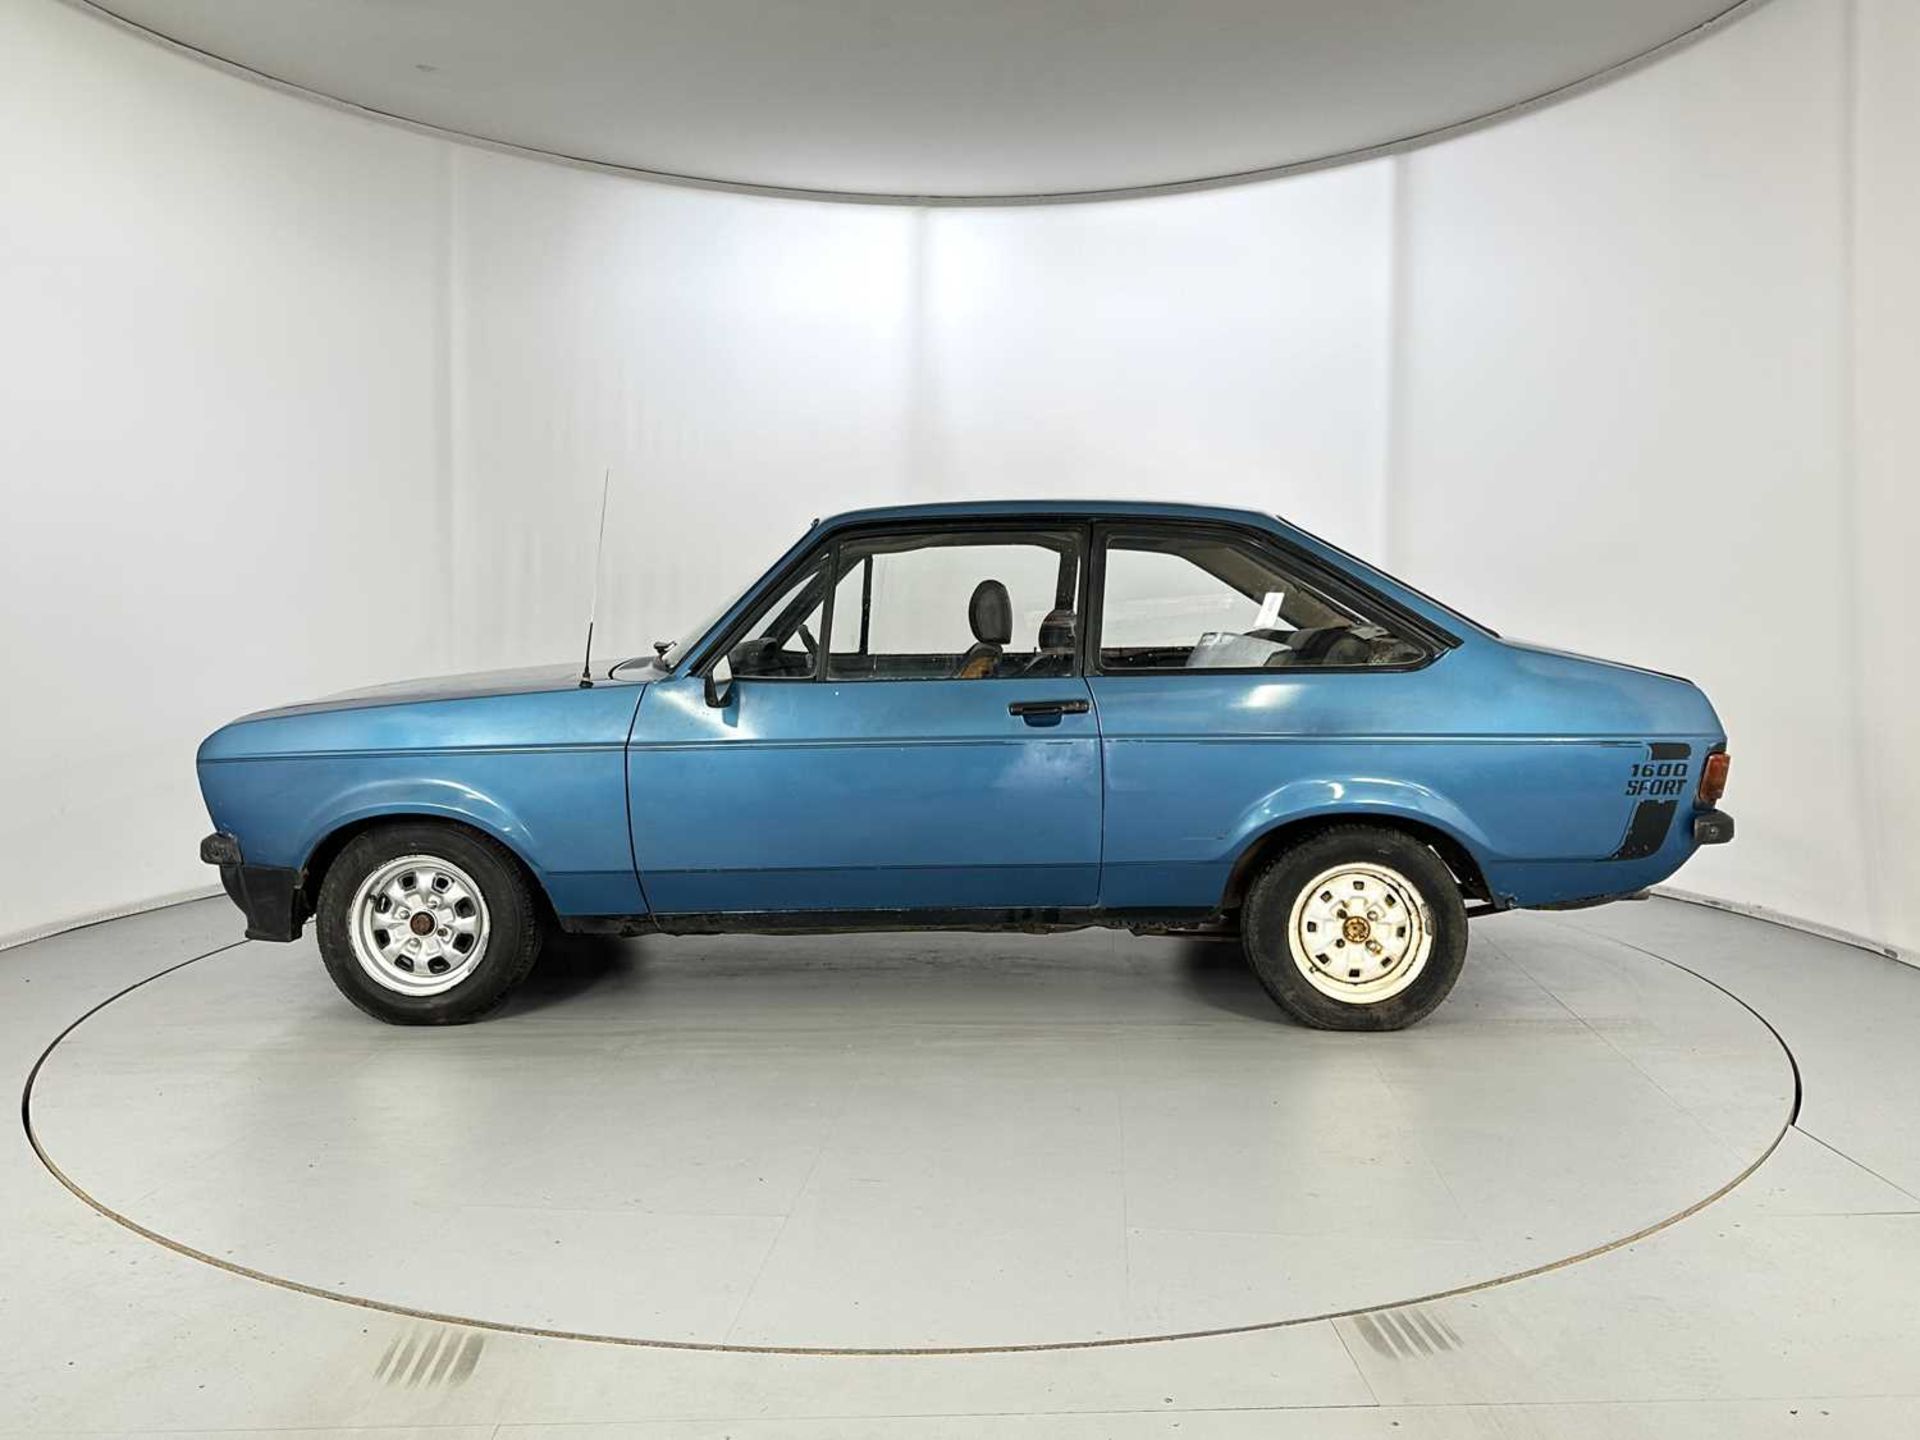 1979 Ford Escort 1600 Sport - Image 5 of 22